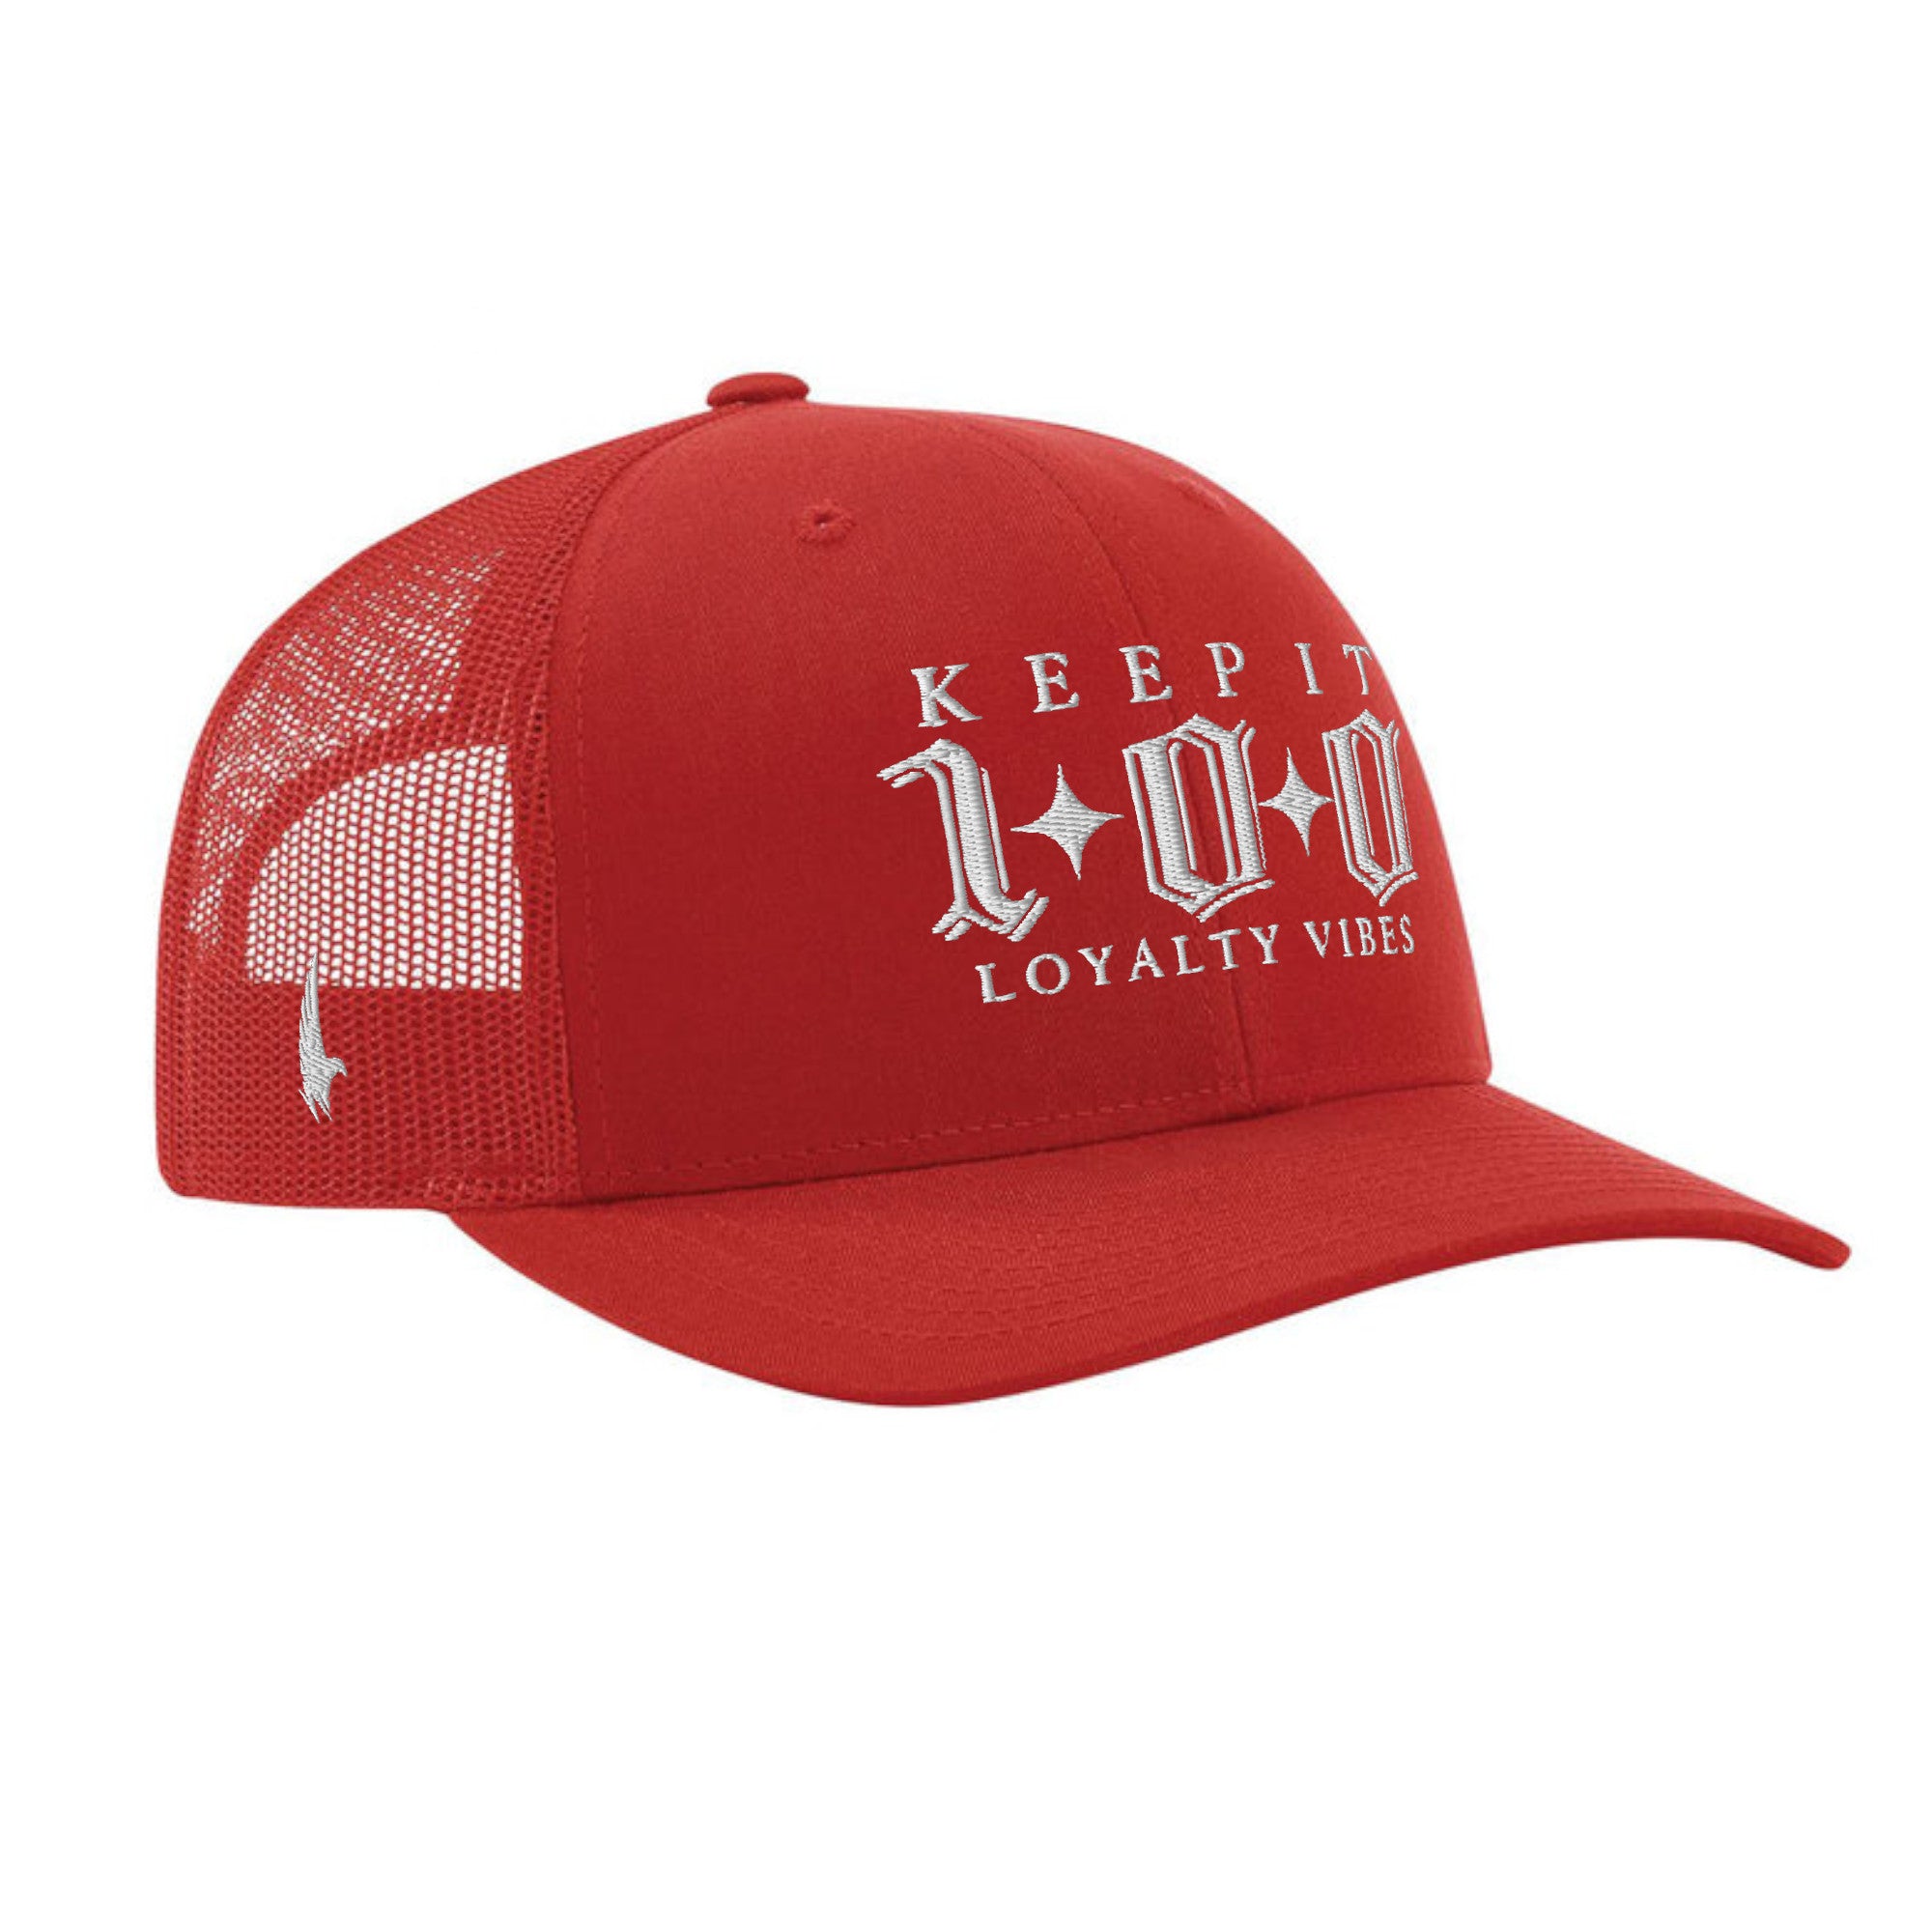 Keep It 100 Trucker Hat Red OS - Loyalty Vibes